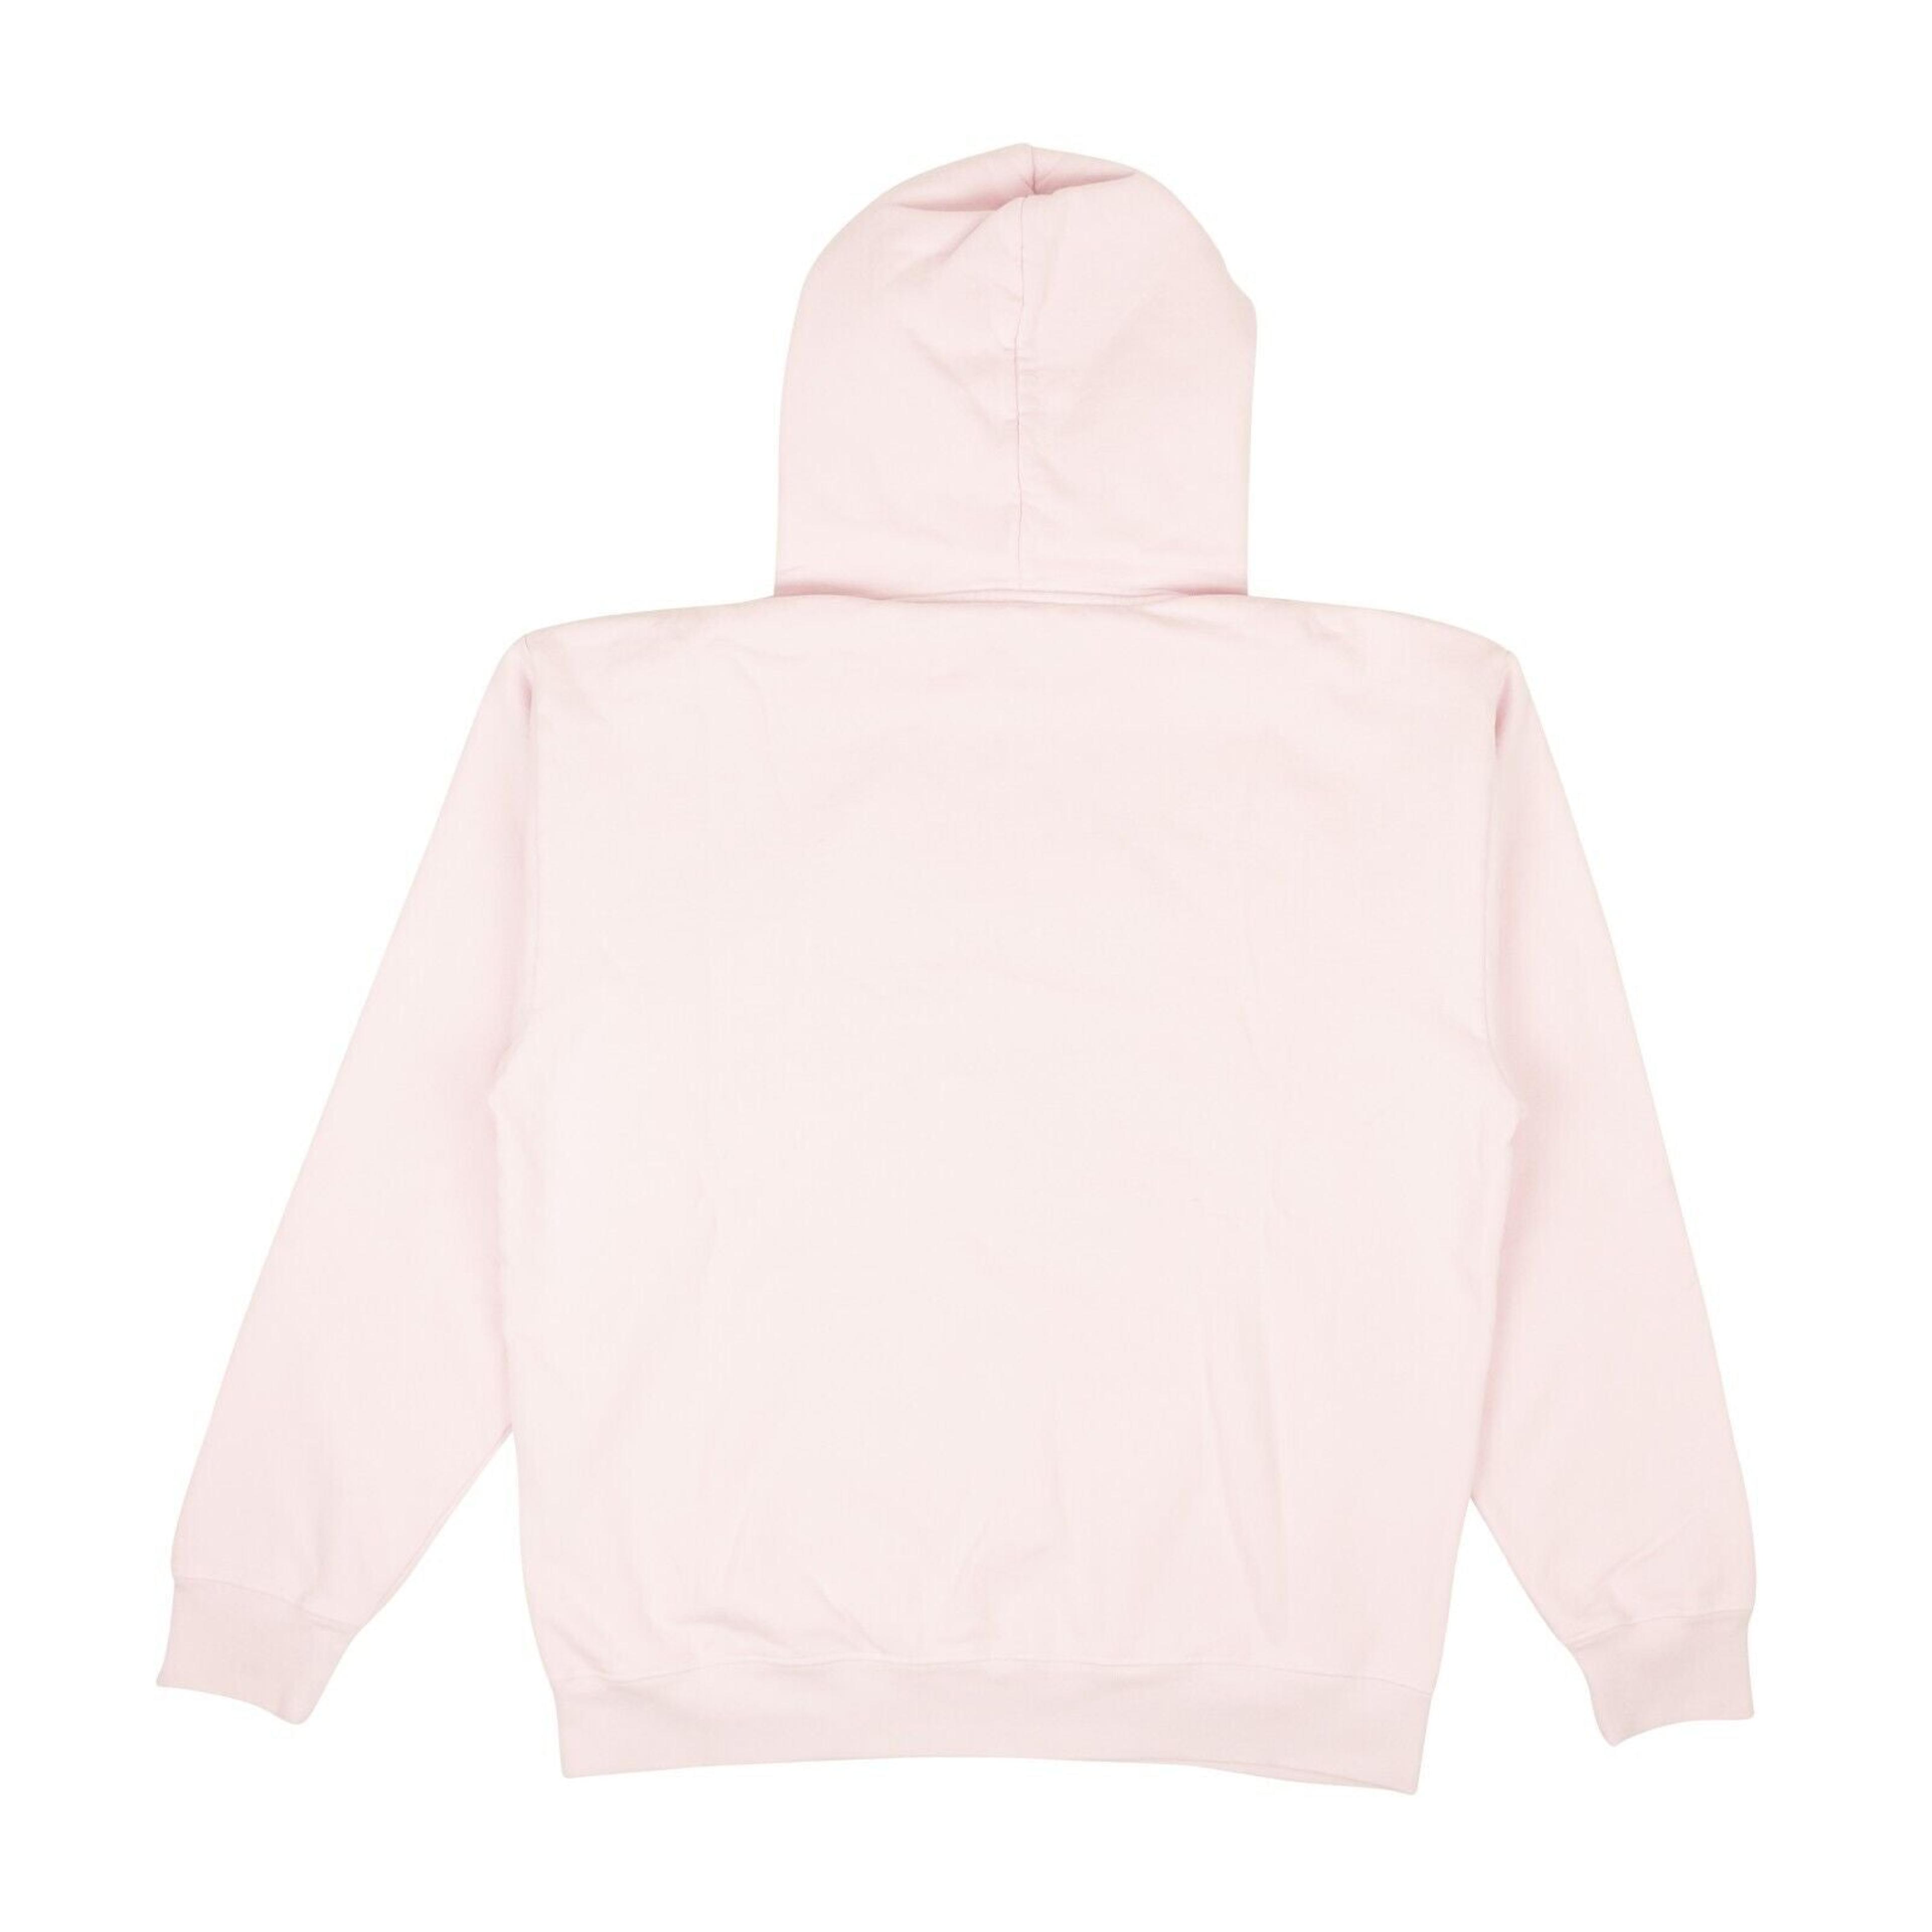 Alternate View 2 of Complexcon X Verdy Hoodie - Pink